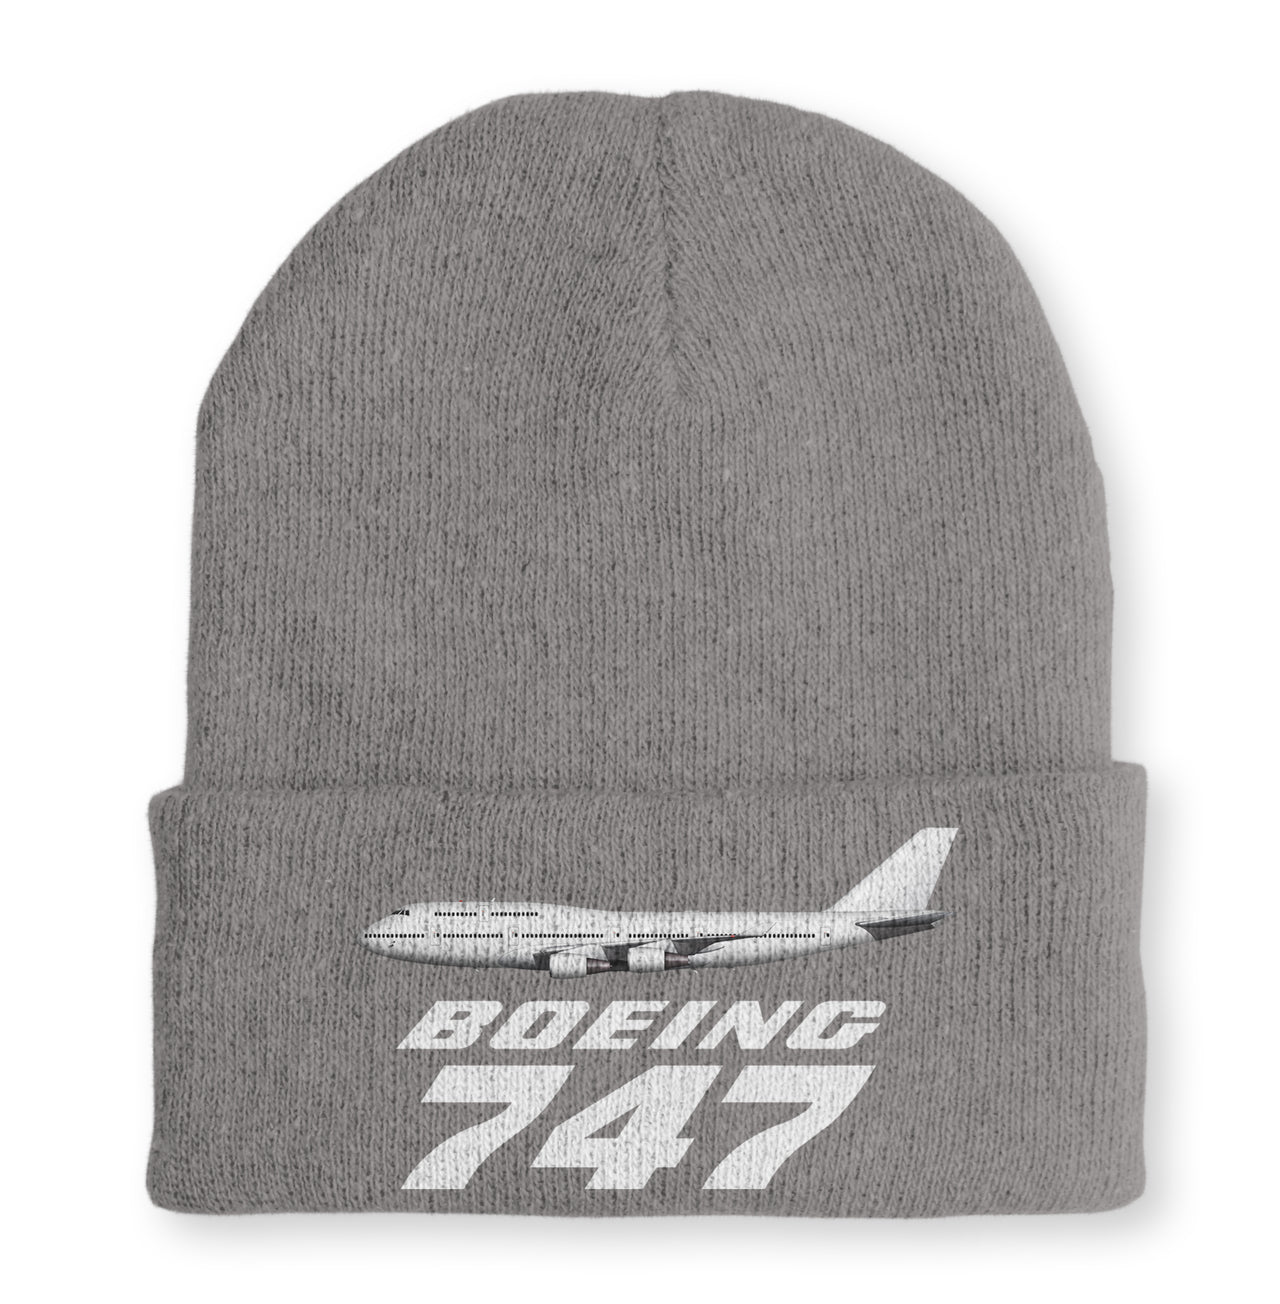 The Boeing 747 Embroidered Beanies